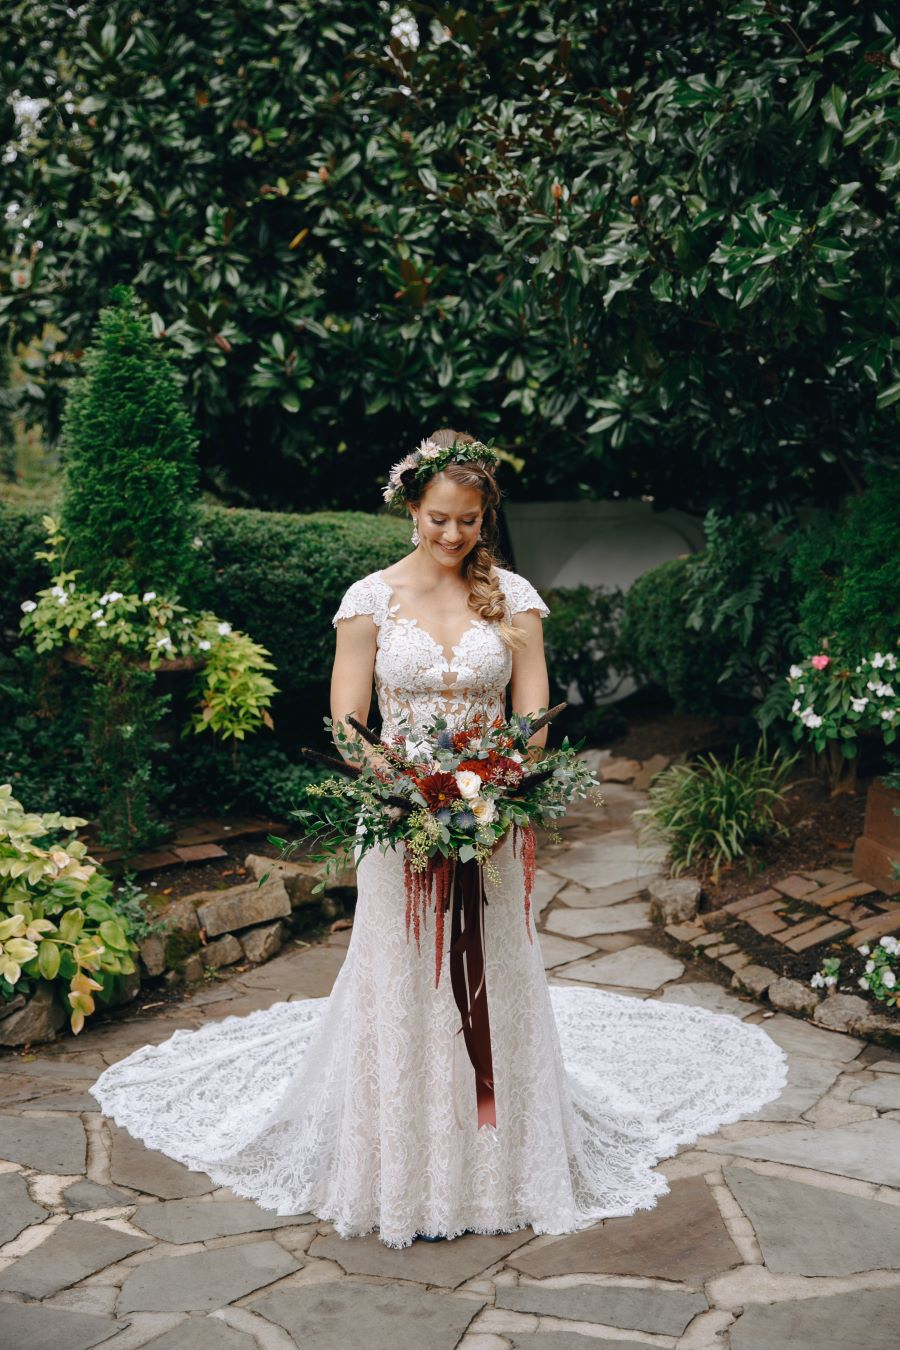 Bride in lace wedding gown holding her bouquet / earthy / fall / October / burgundy